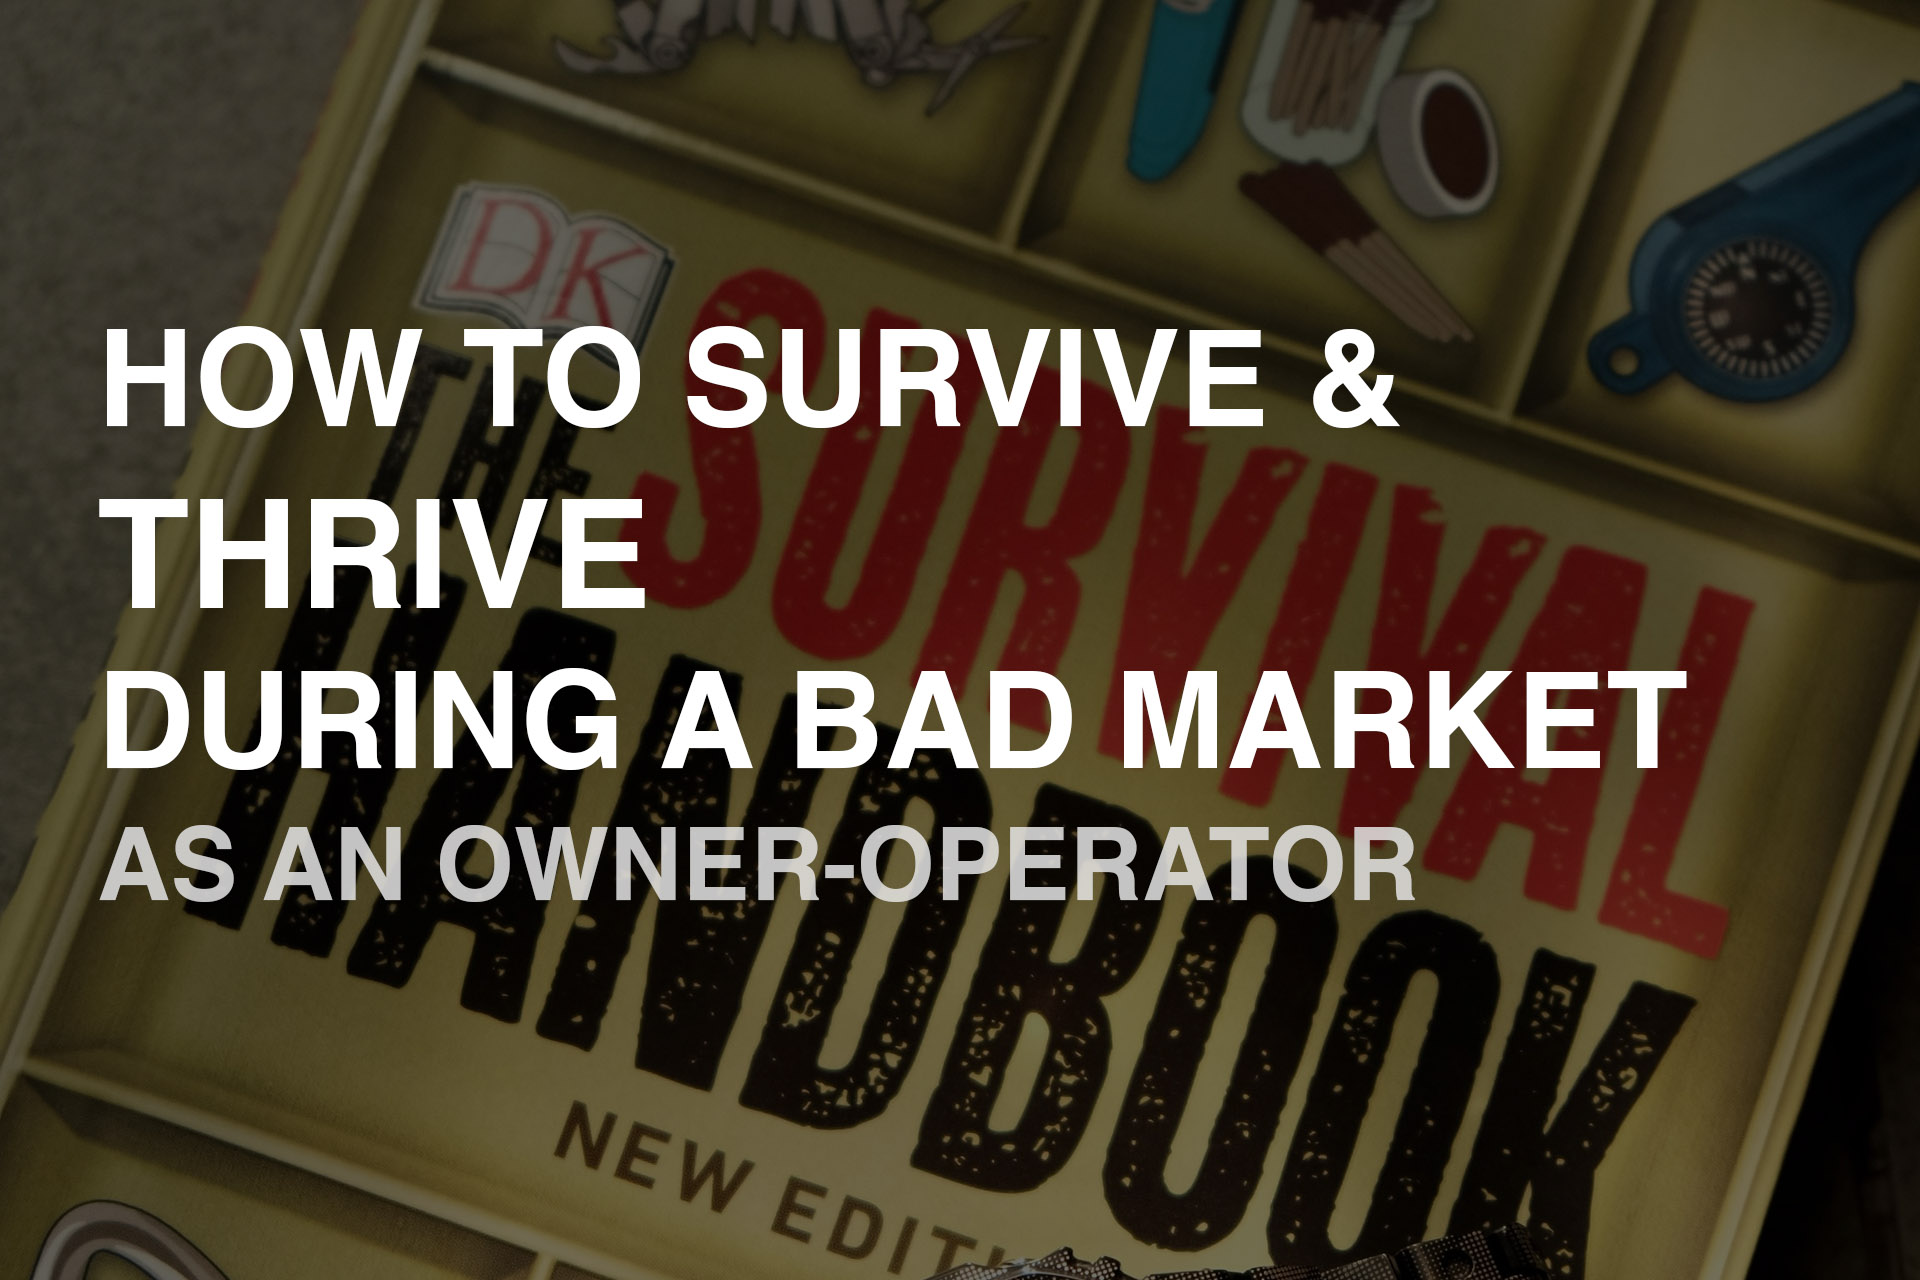 HOW TO SURVIVE AND THRIVE DURING A BAD MARKET AS AN OWNER OPERATOR